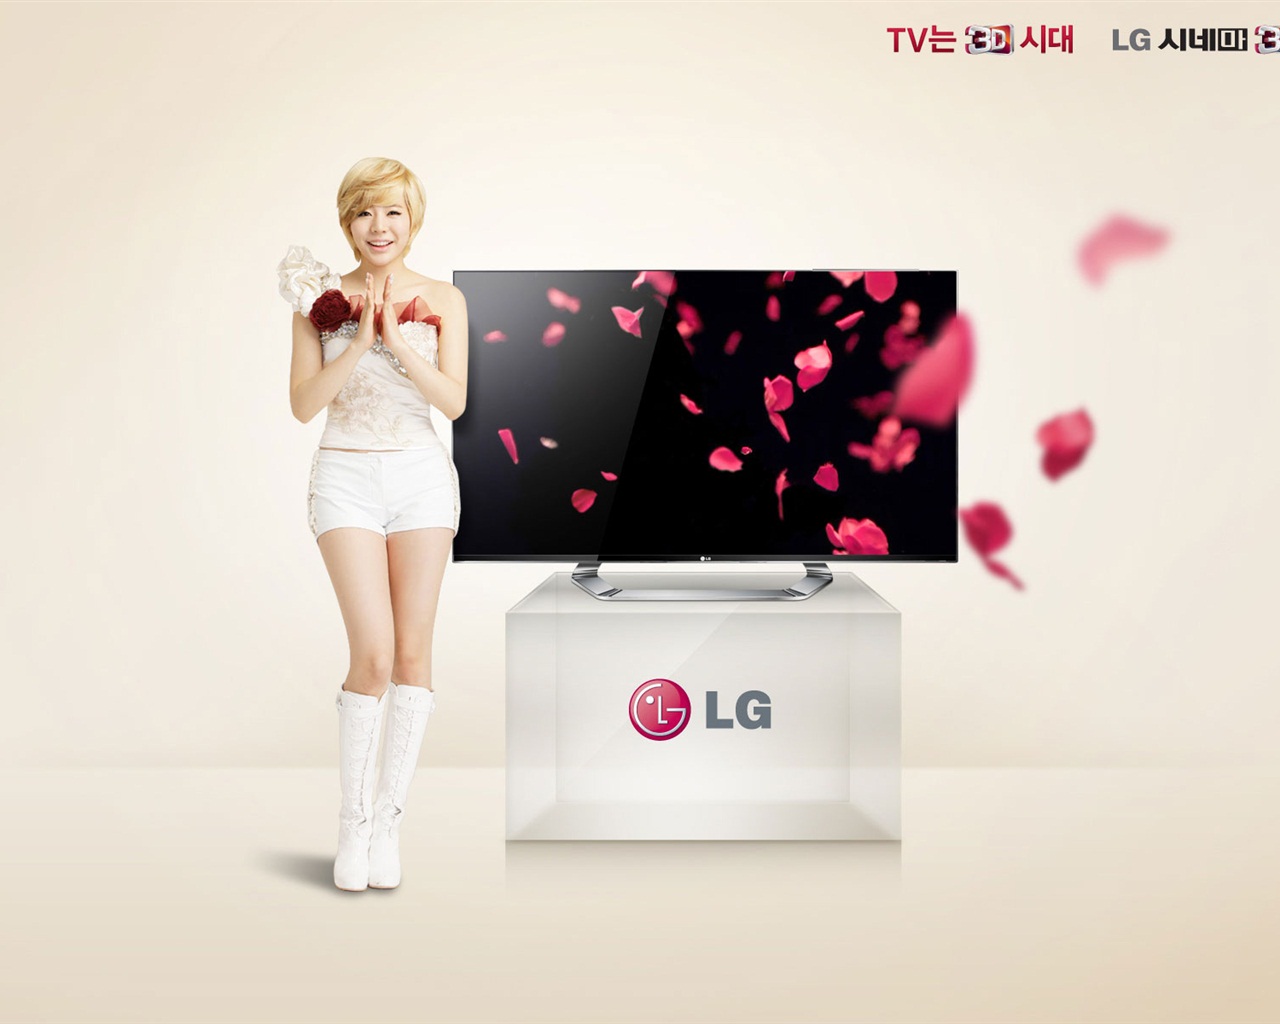 Girls Generation ACE and LG endorsements ads HD wallpapers #19 - 1280x1024